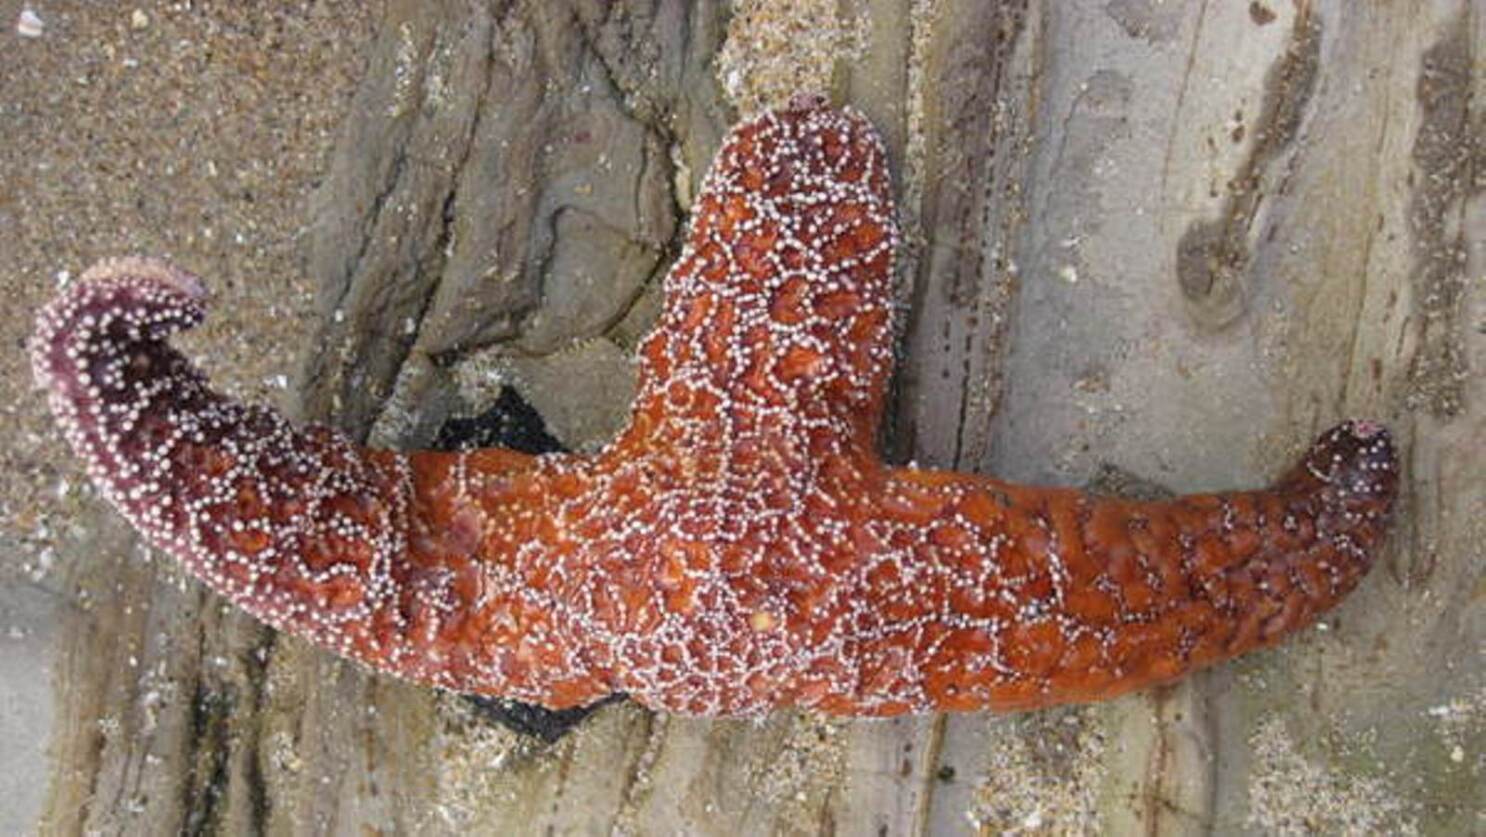 Disease nearly wiped out sea stars on California's Central Coast